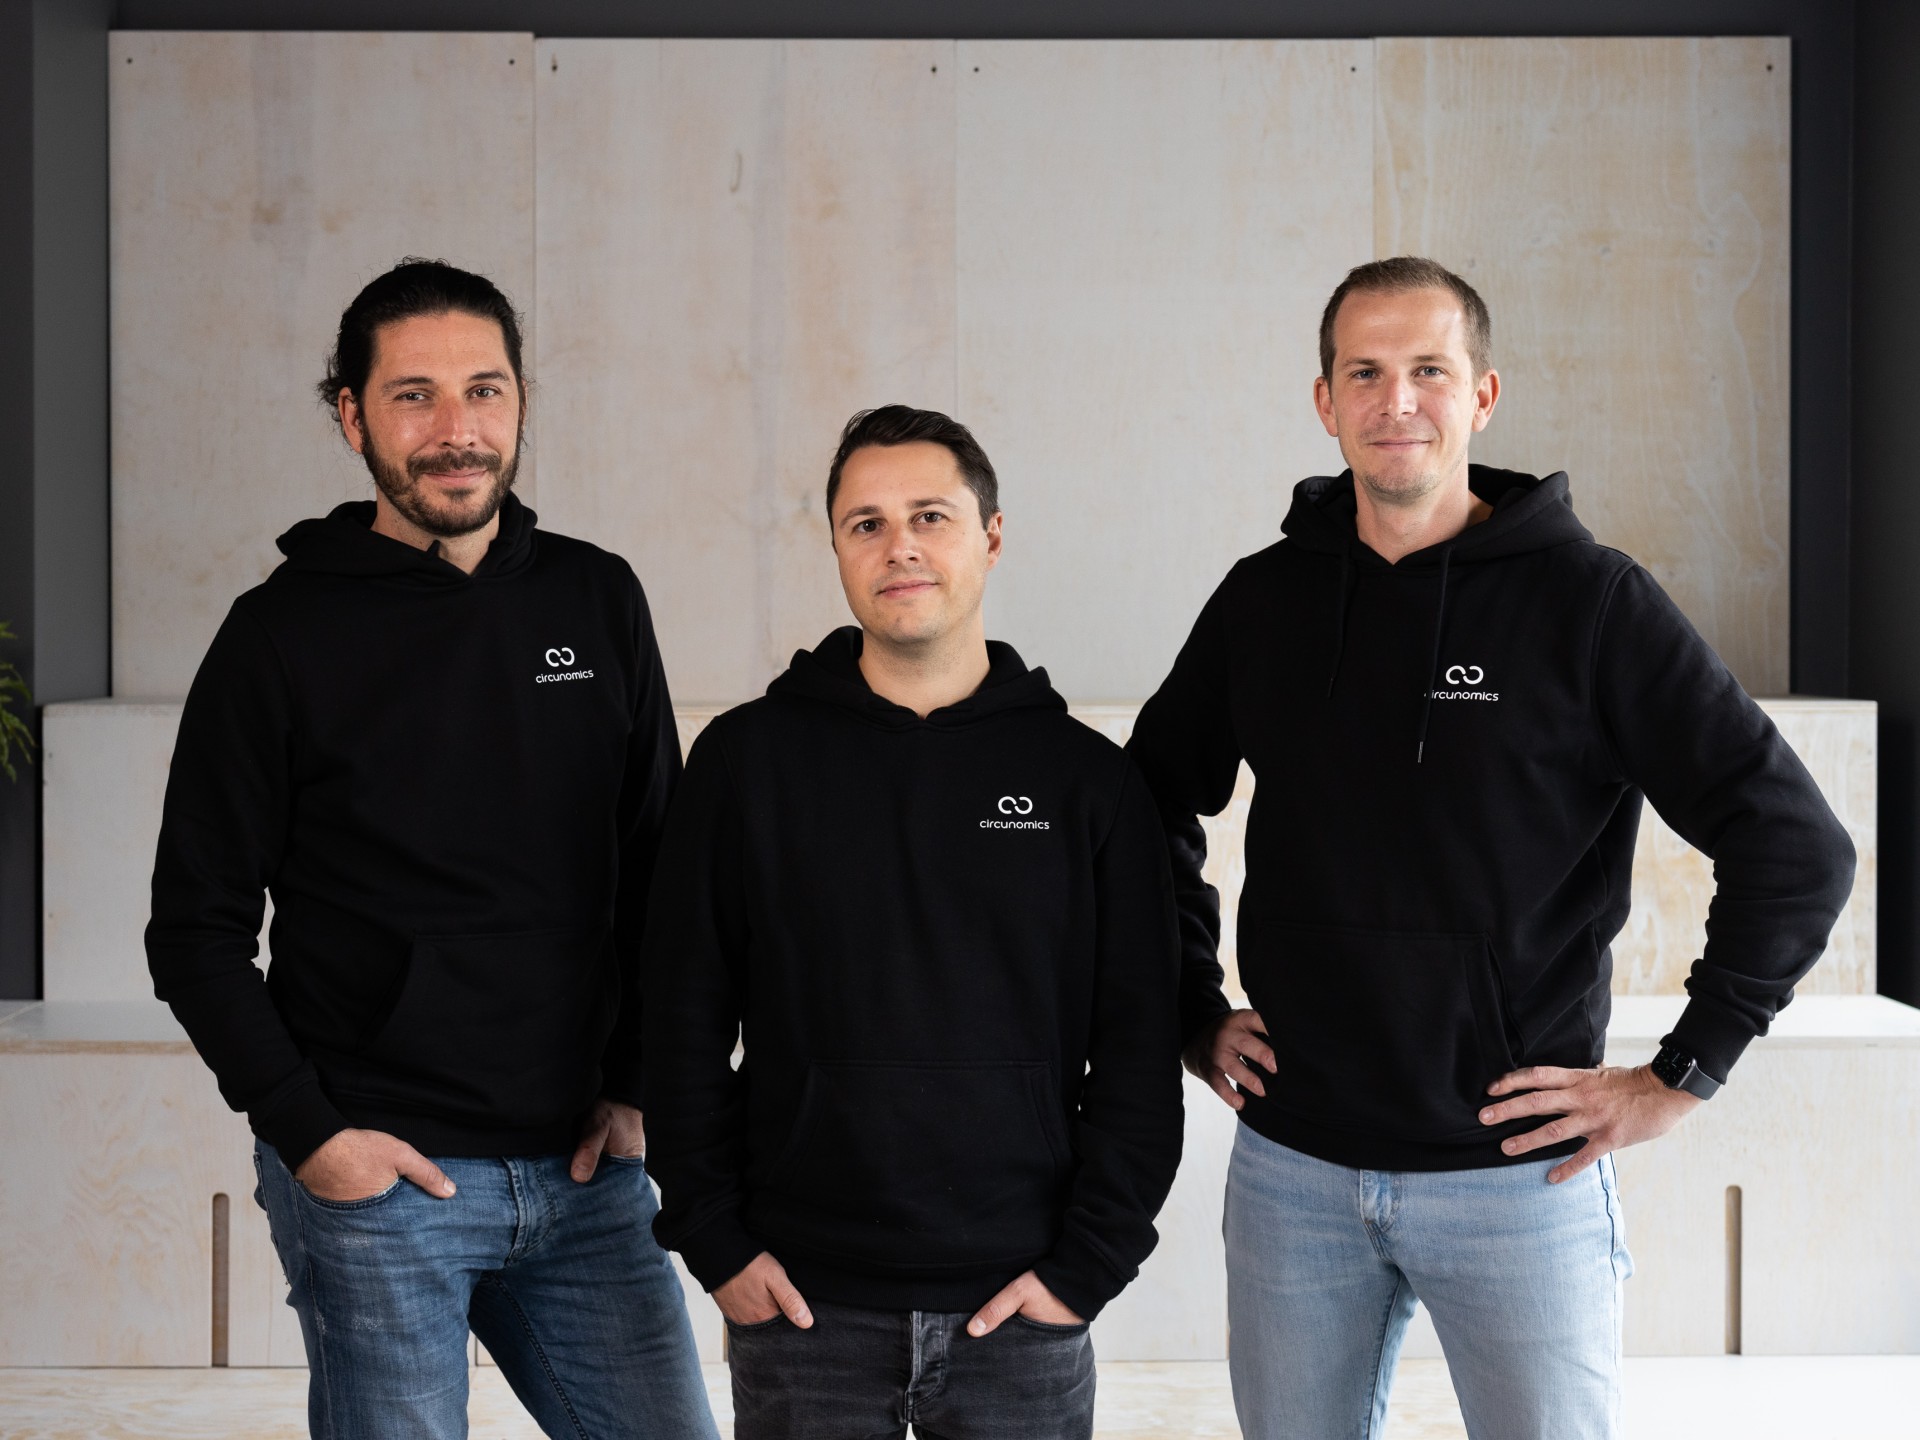 Portrait of the three founders wearing hoodies with Circunomics logo